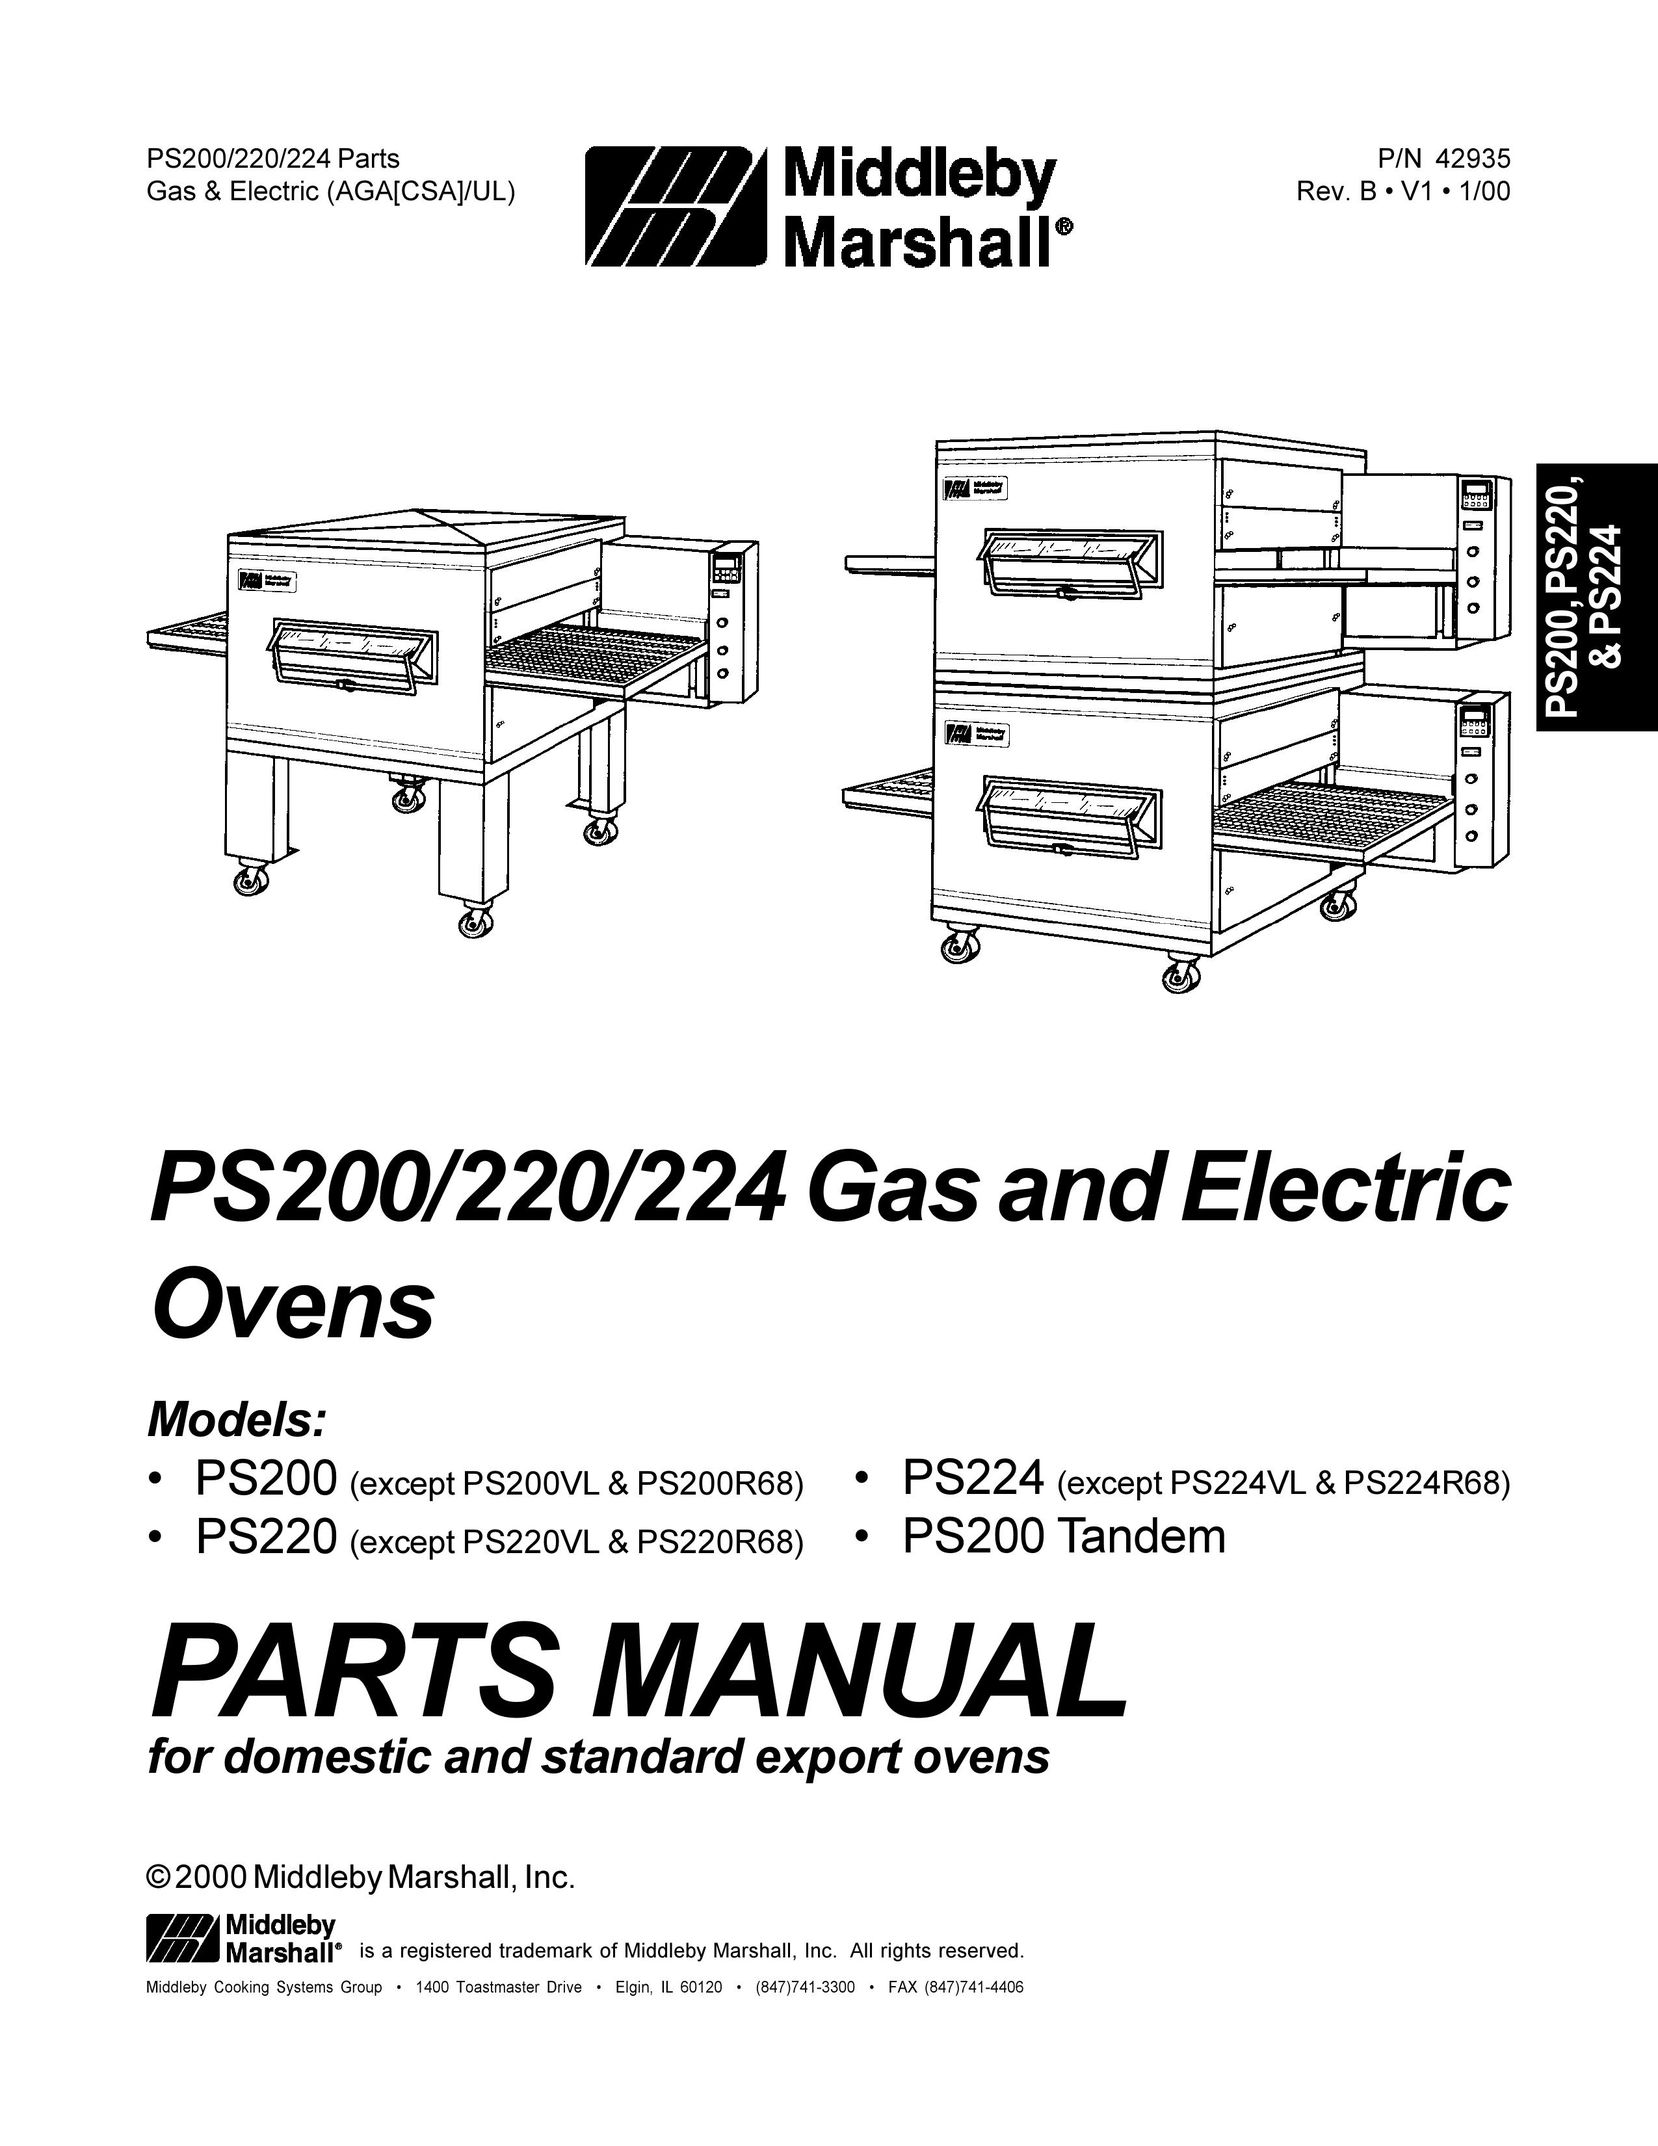 Middleby Marshall PS224 Oven User Manual